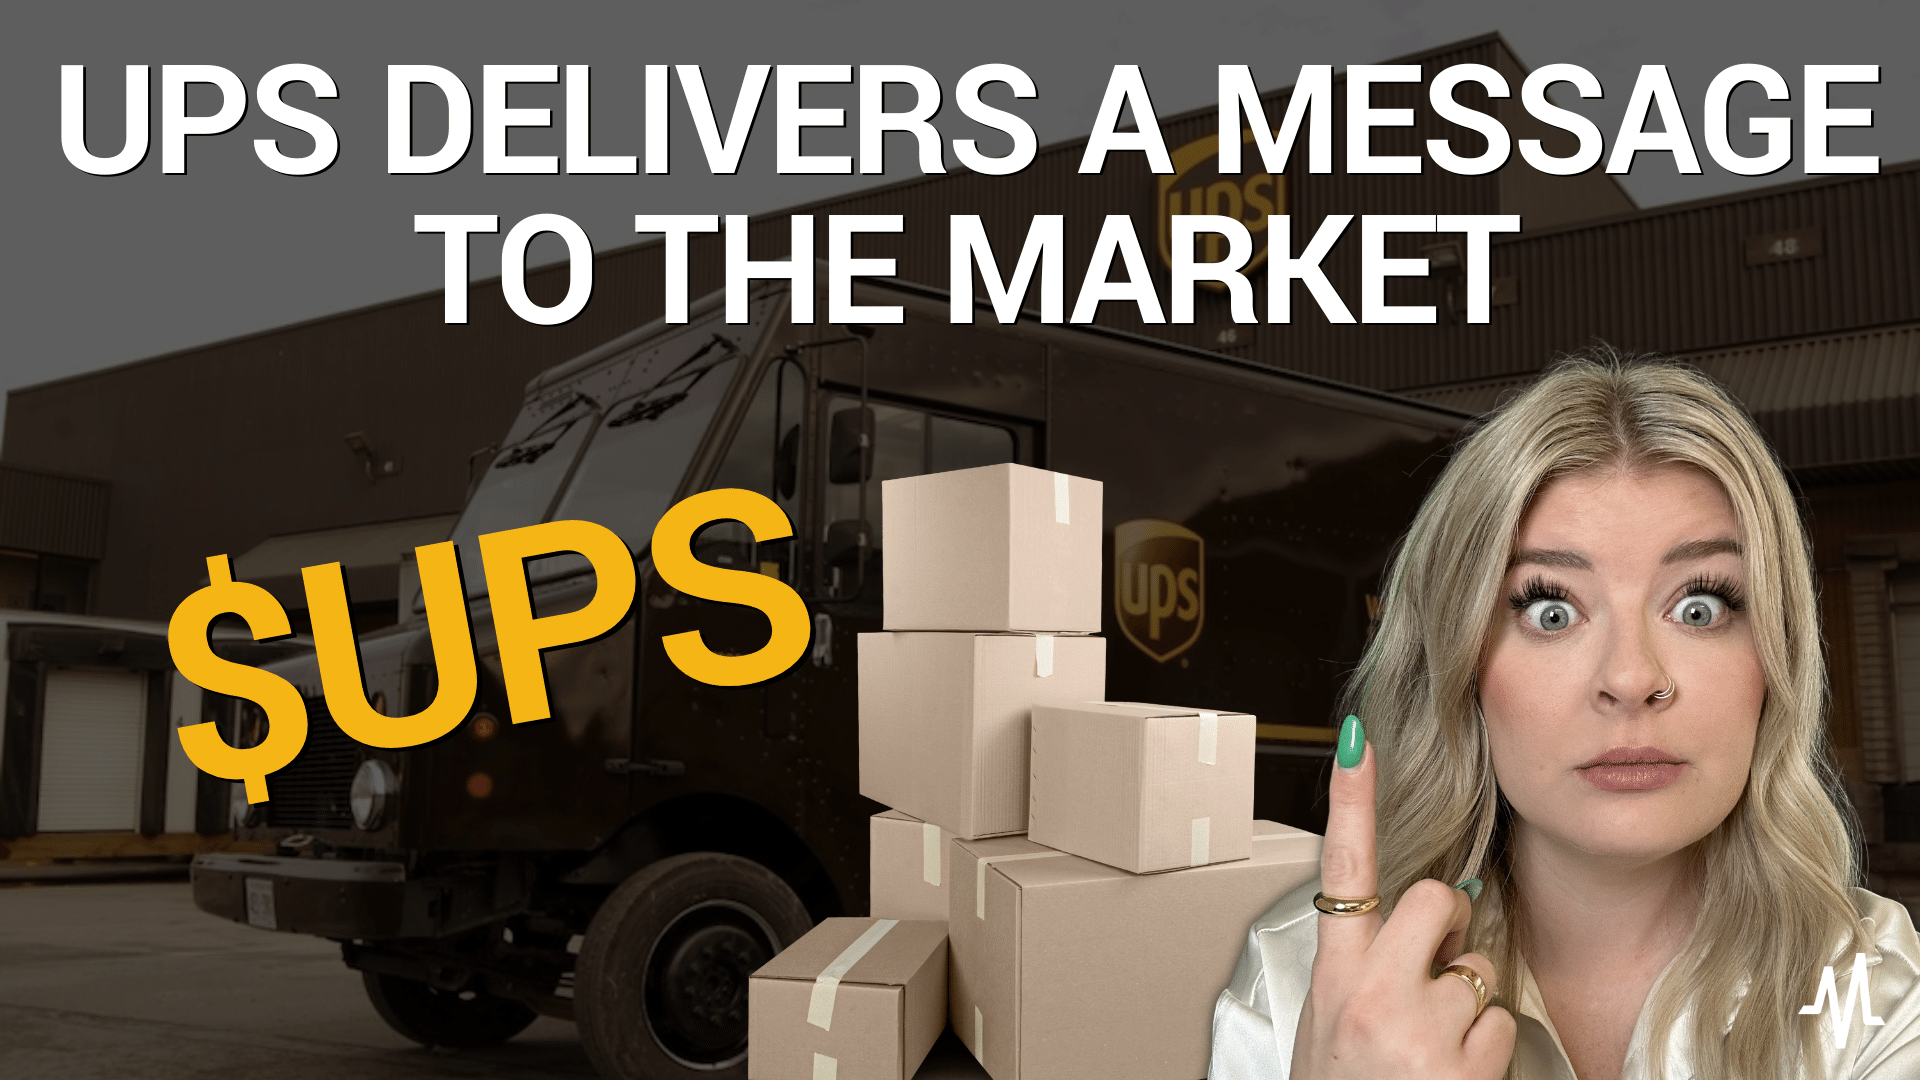 UPS Delivers a Message to the Market, Economy